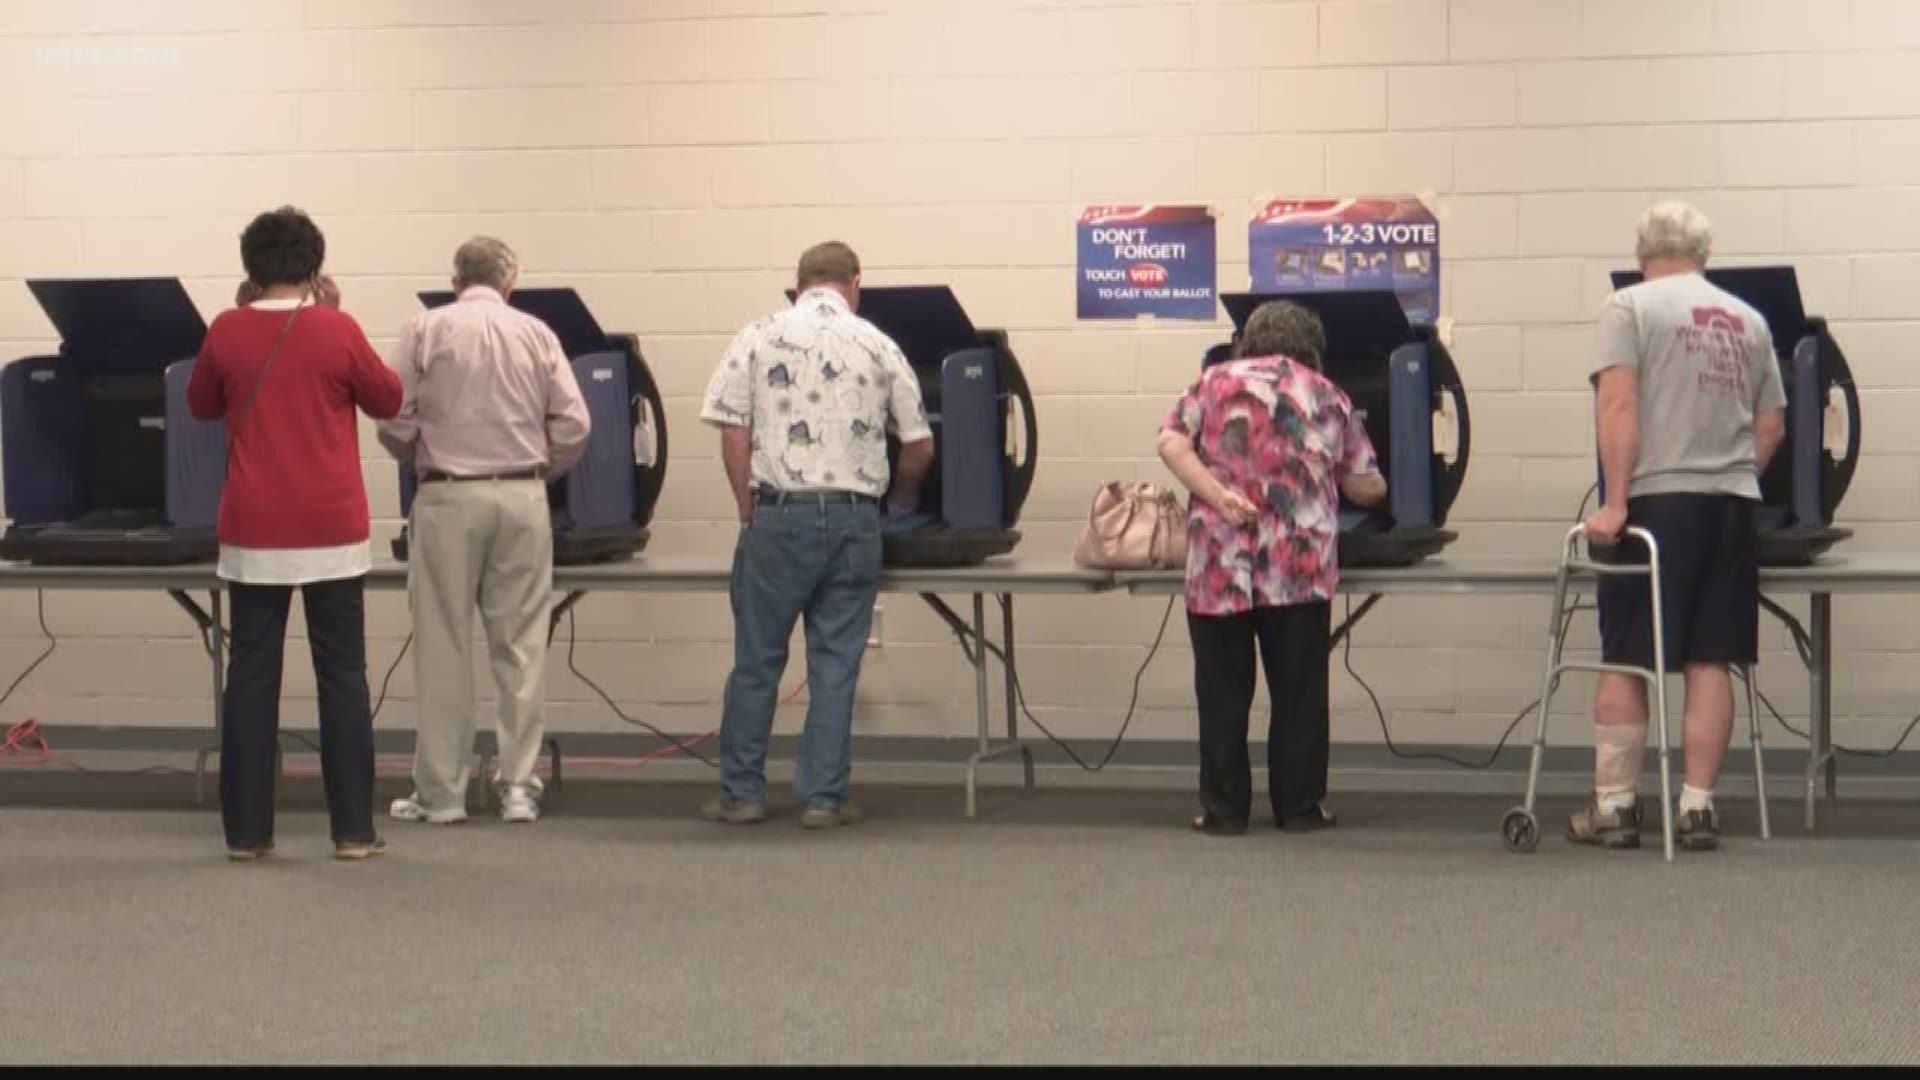 After reported problems with Richland County voting machine touchscreens and ballot counting... there's been renewed focus on replacing voting machines across the state.